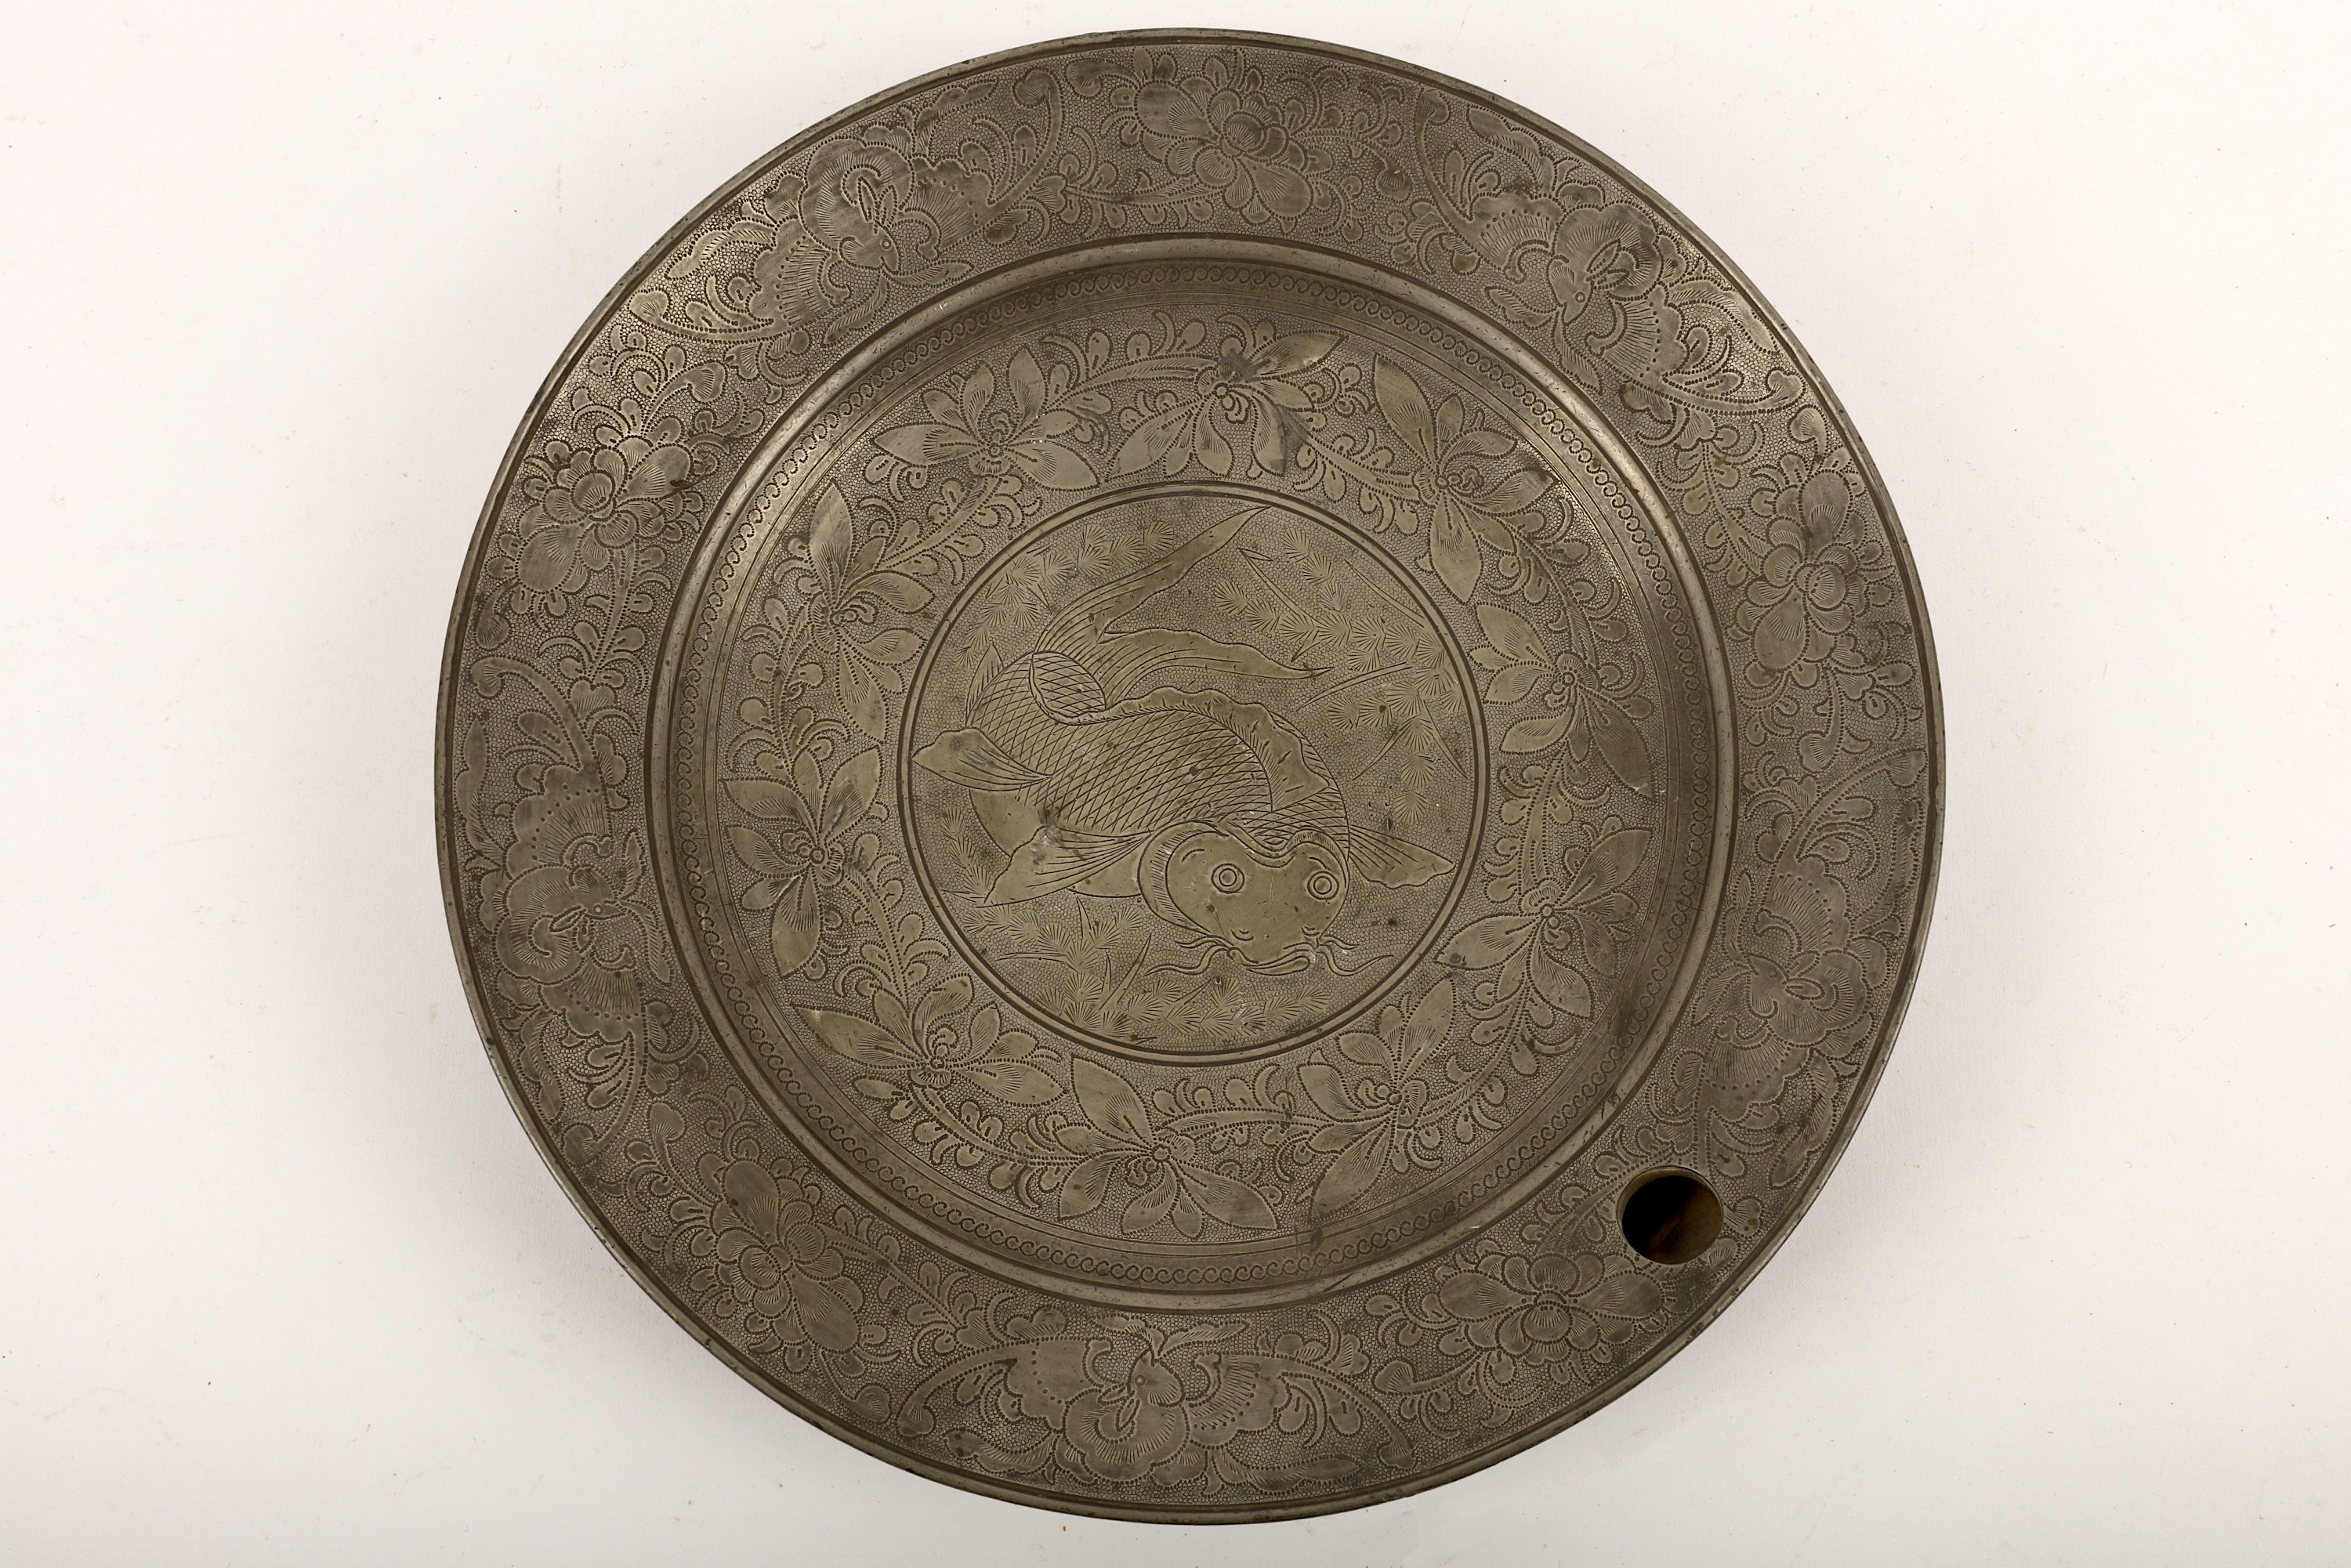 A Chinese pewter dish warmer, of everted shape with a sealed base and a round hole in the dish for